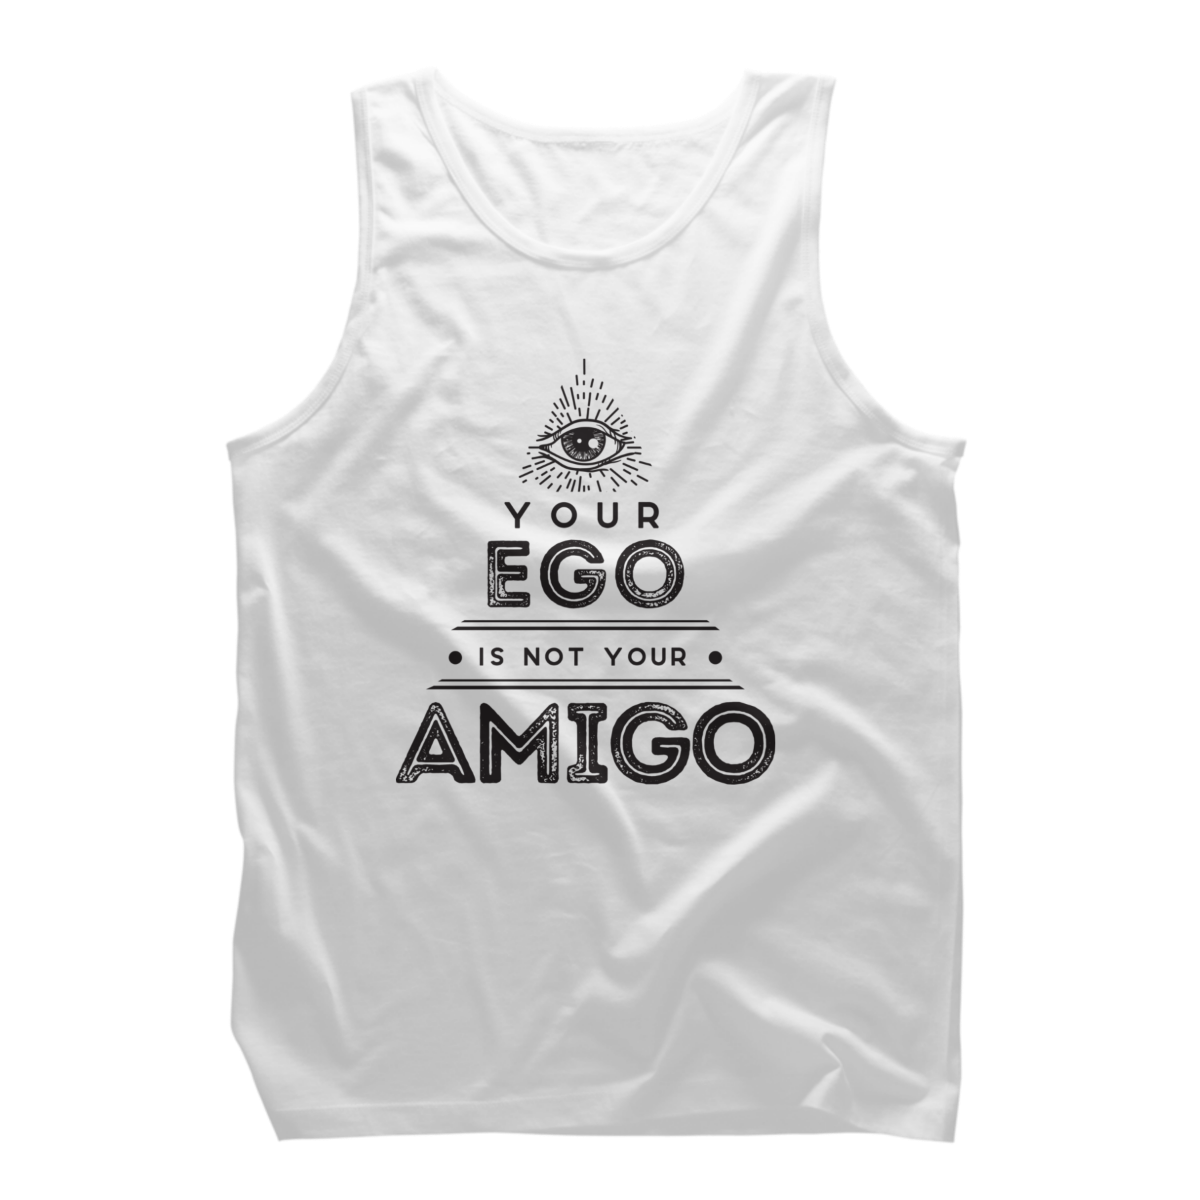 your ego is not your amigo shirt